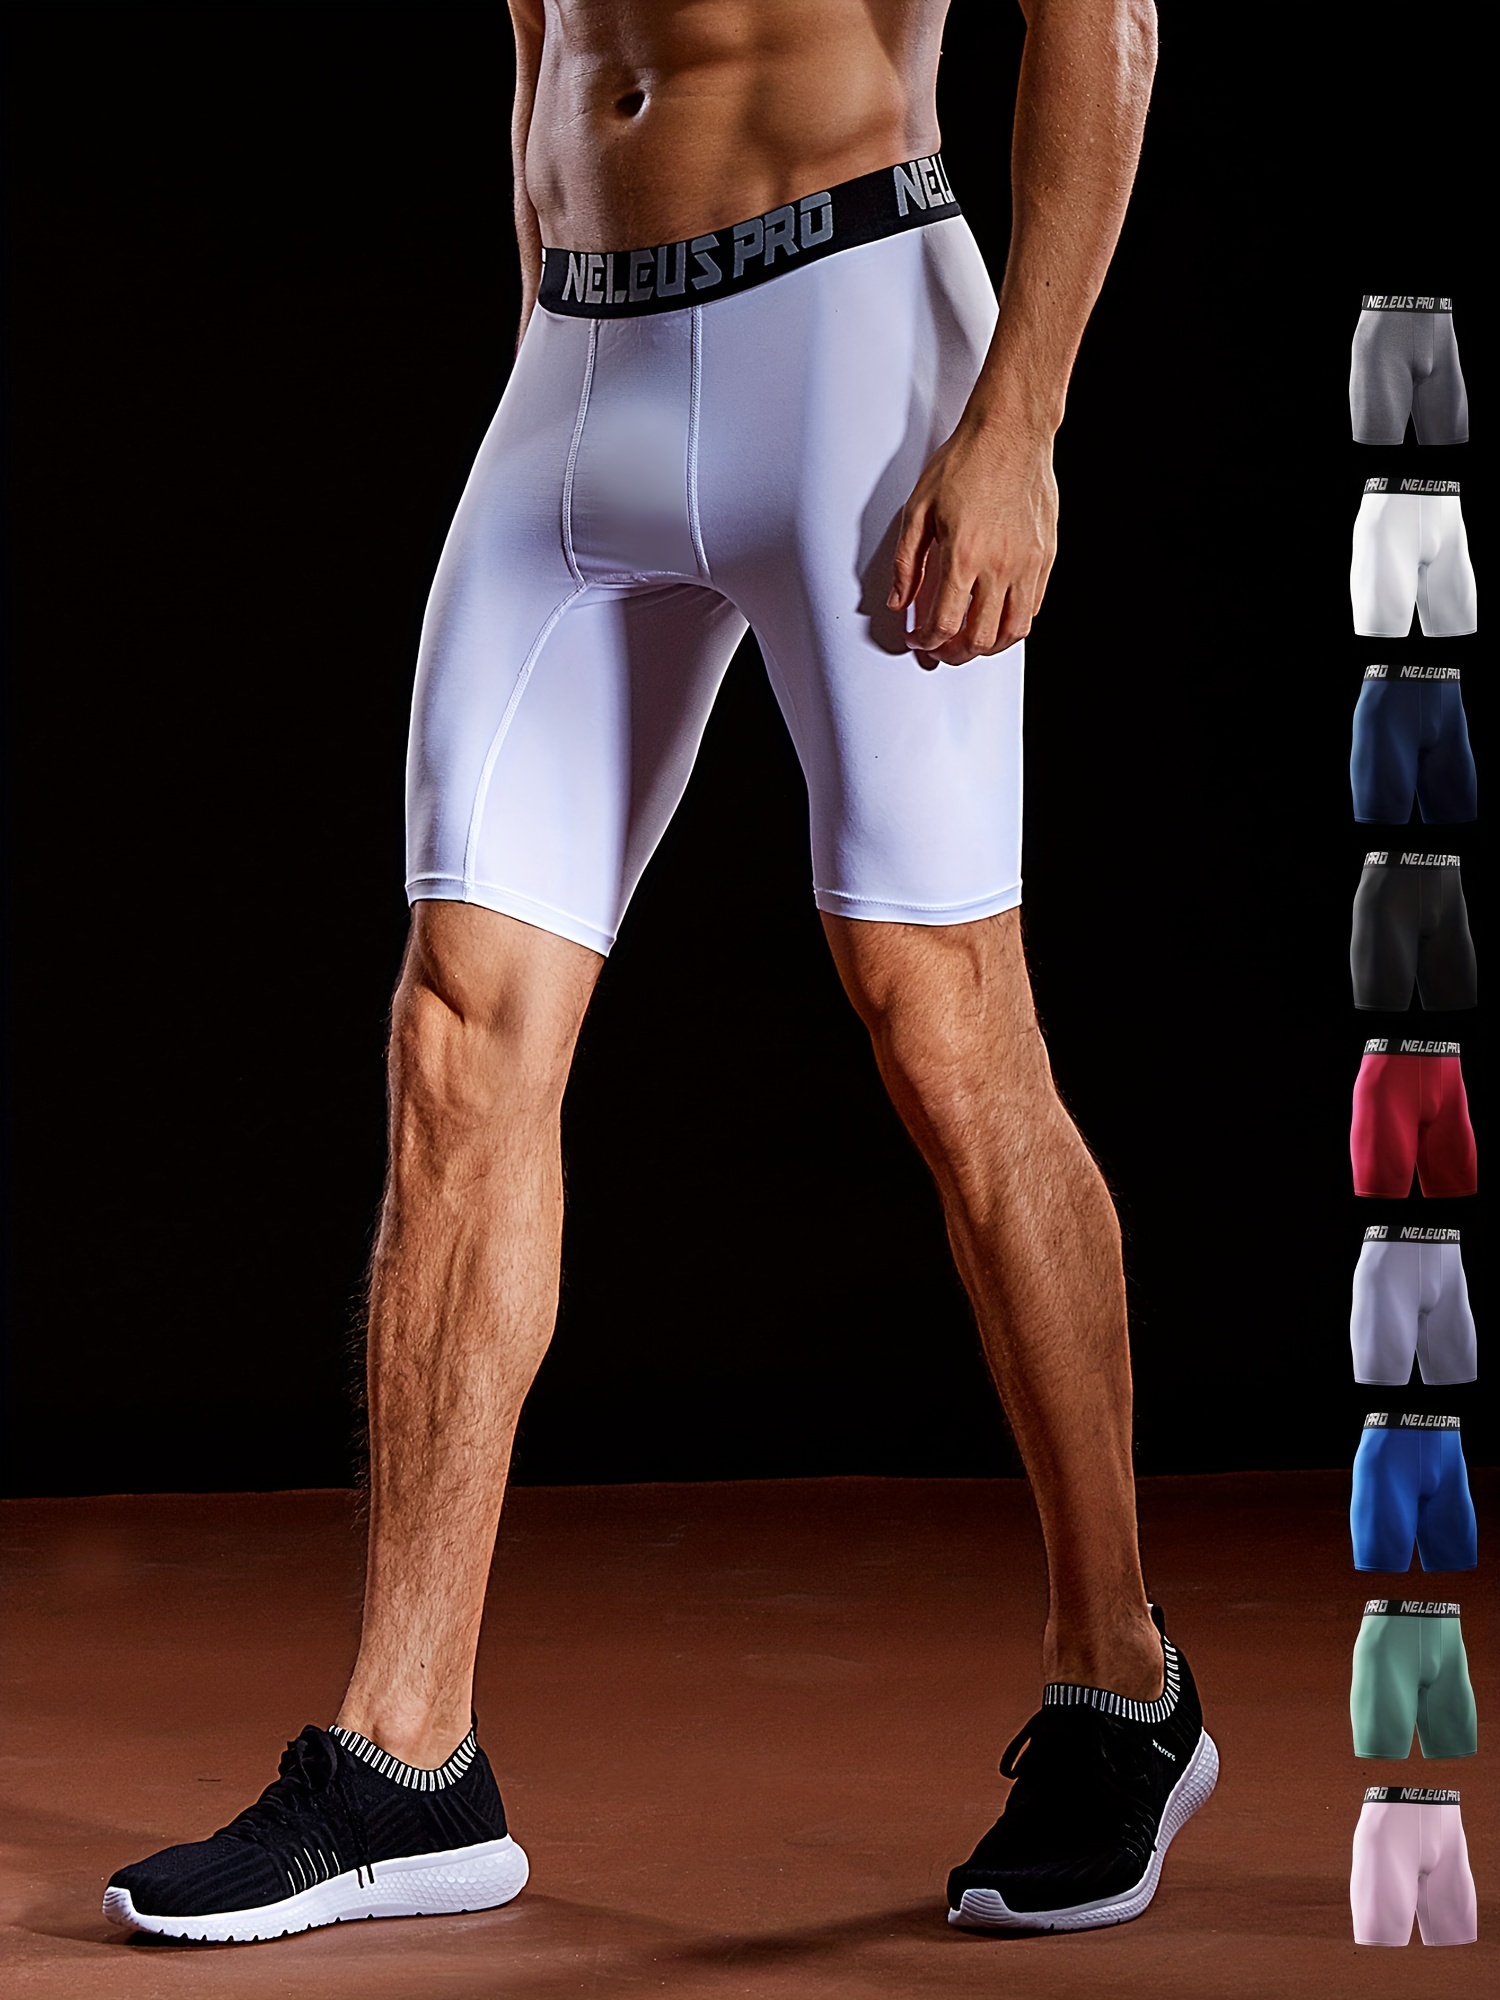 Elastic Sports Compression Shorts Men For Men Ideal For Running, Basketball,  And Fitness Tight Fit Design Style X0824 X0828 From Fashion_official01,  $15.35